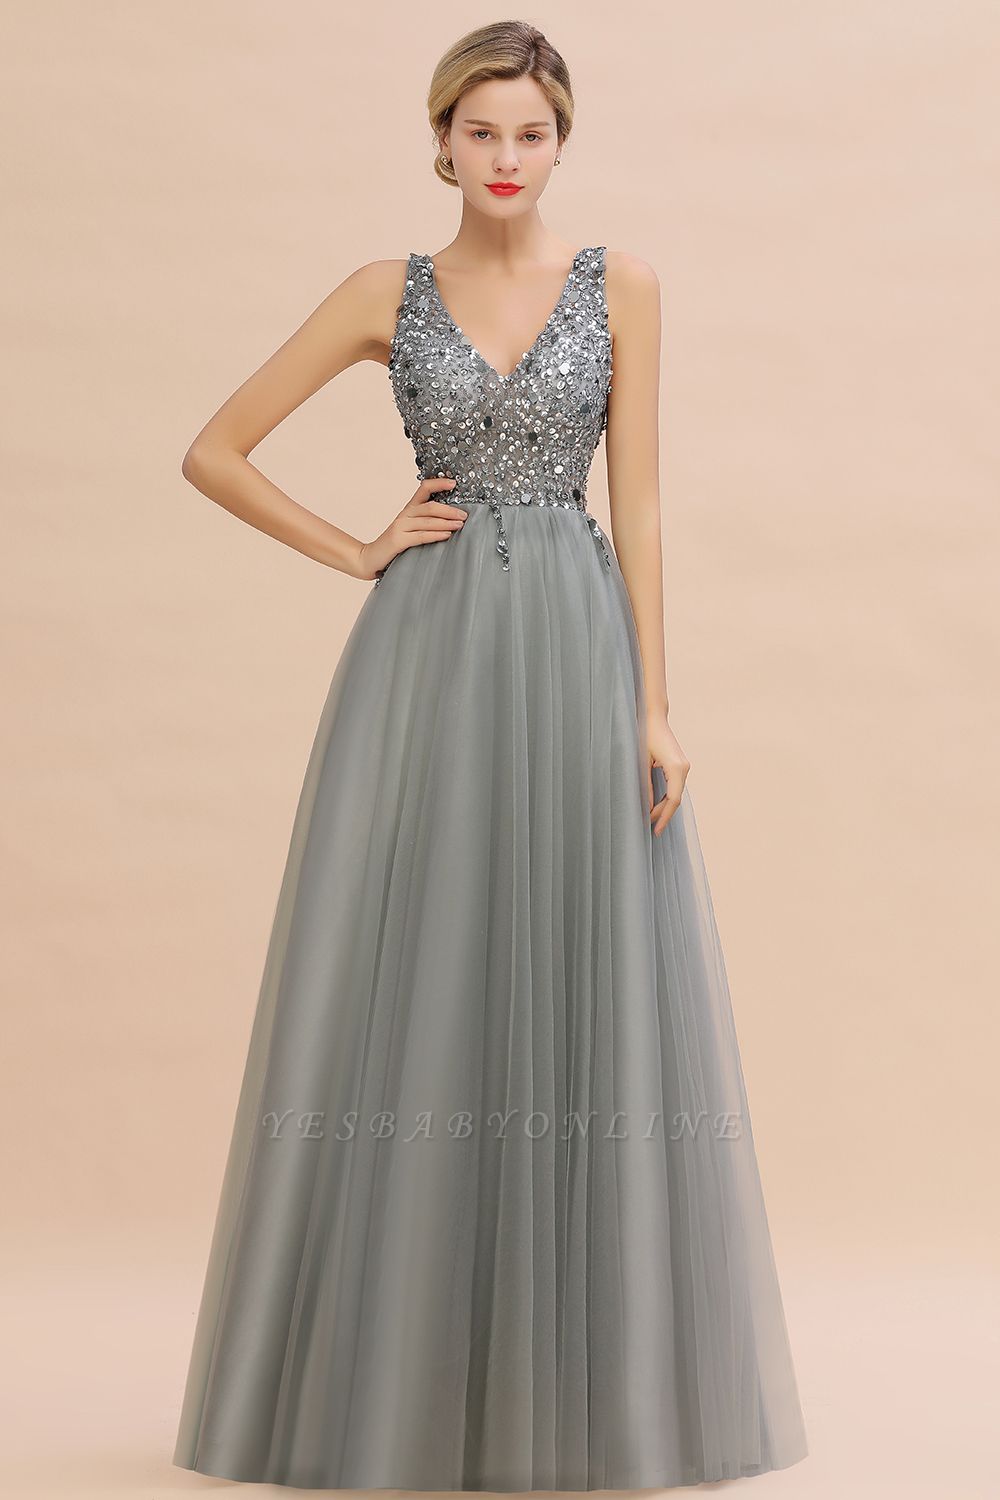 Sleeveless A-line Sequin Tulle Prom Dresses | Evening Dress